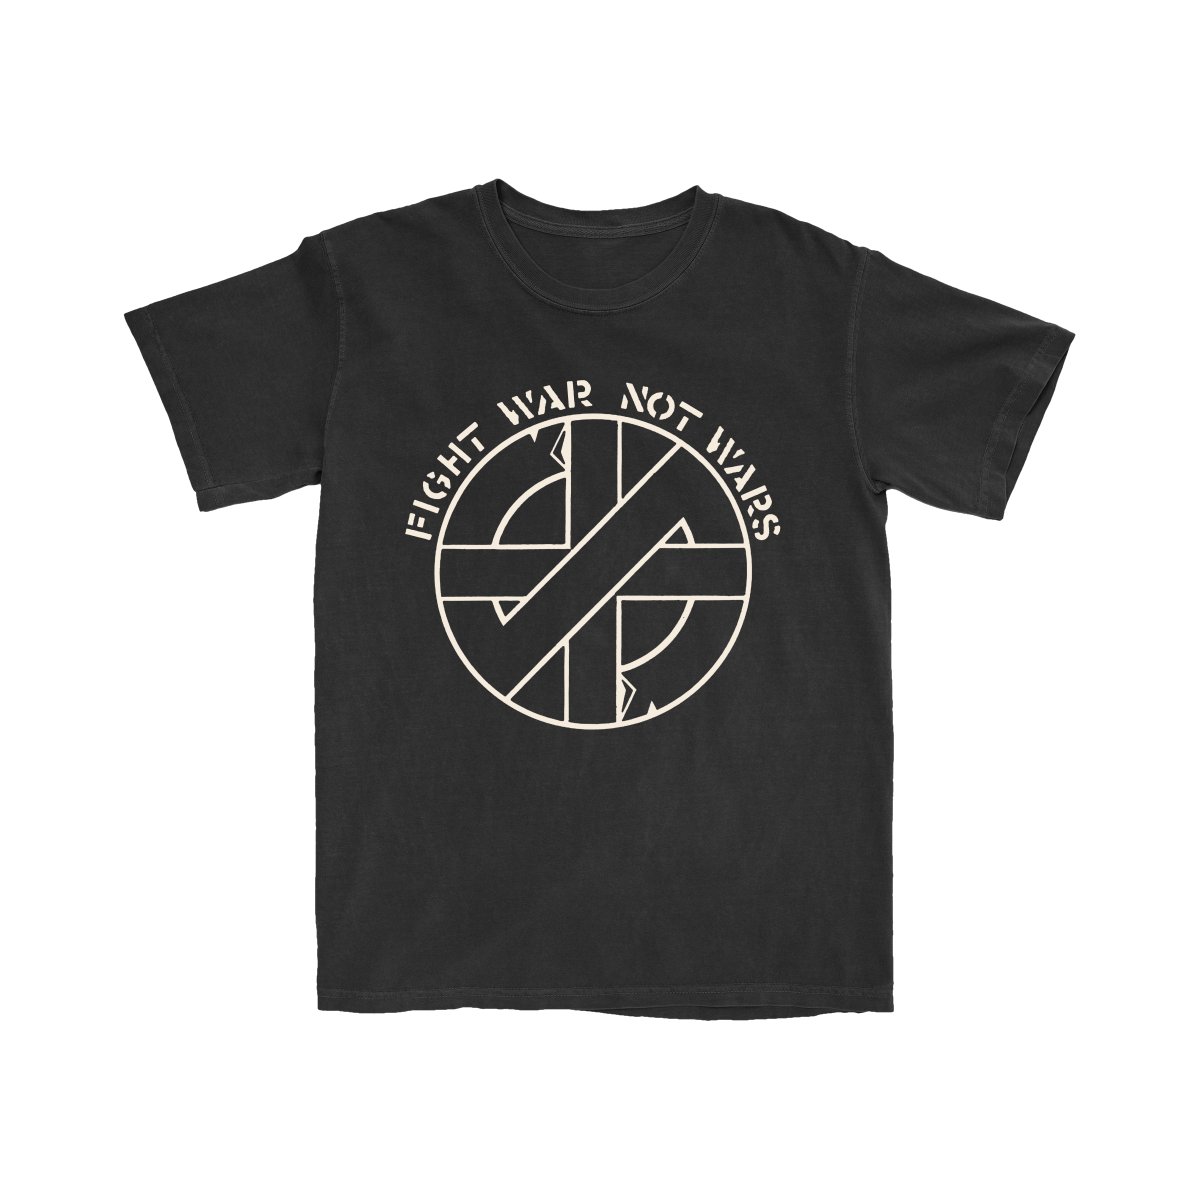 FIGHT WAR NOT WARS tees back in stock, XS - 5XL Also tour merch and 2024 Tour poster on thick recycled card - limited to 50. steveignorant.com/product-page/f… @steveigs #crass